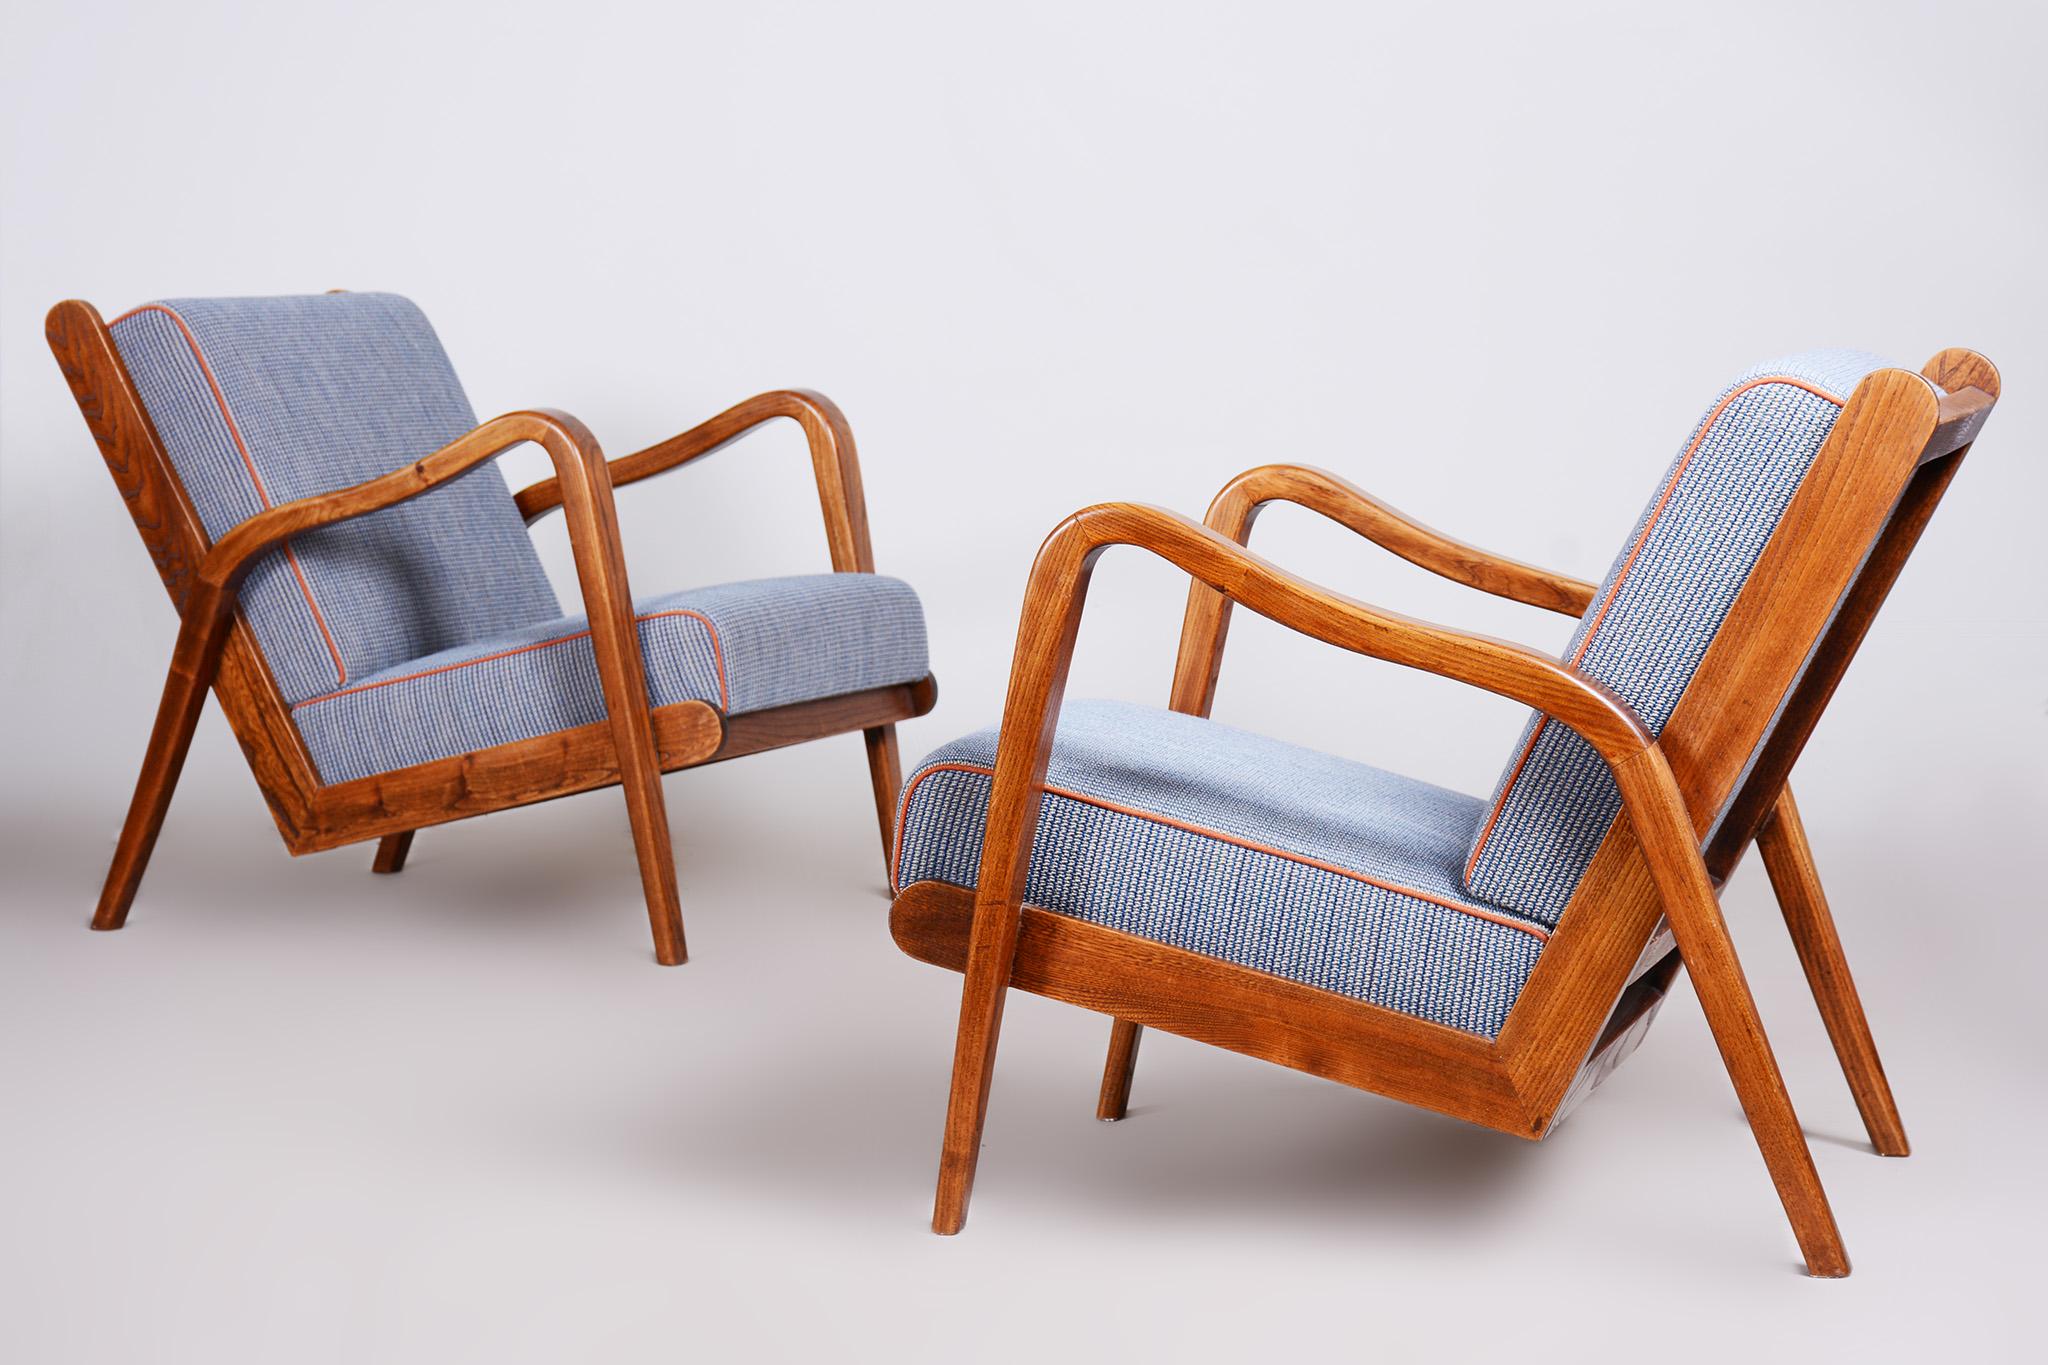 Ash Mid Century Armchairs Made in Czechia '40s, by Jan Vanek, Fully Restored 6